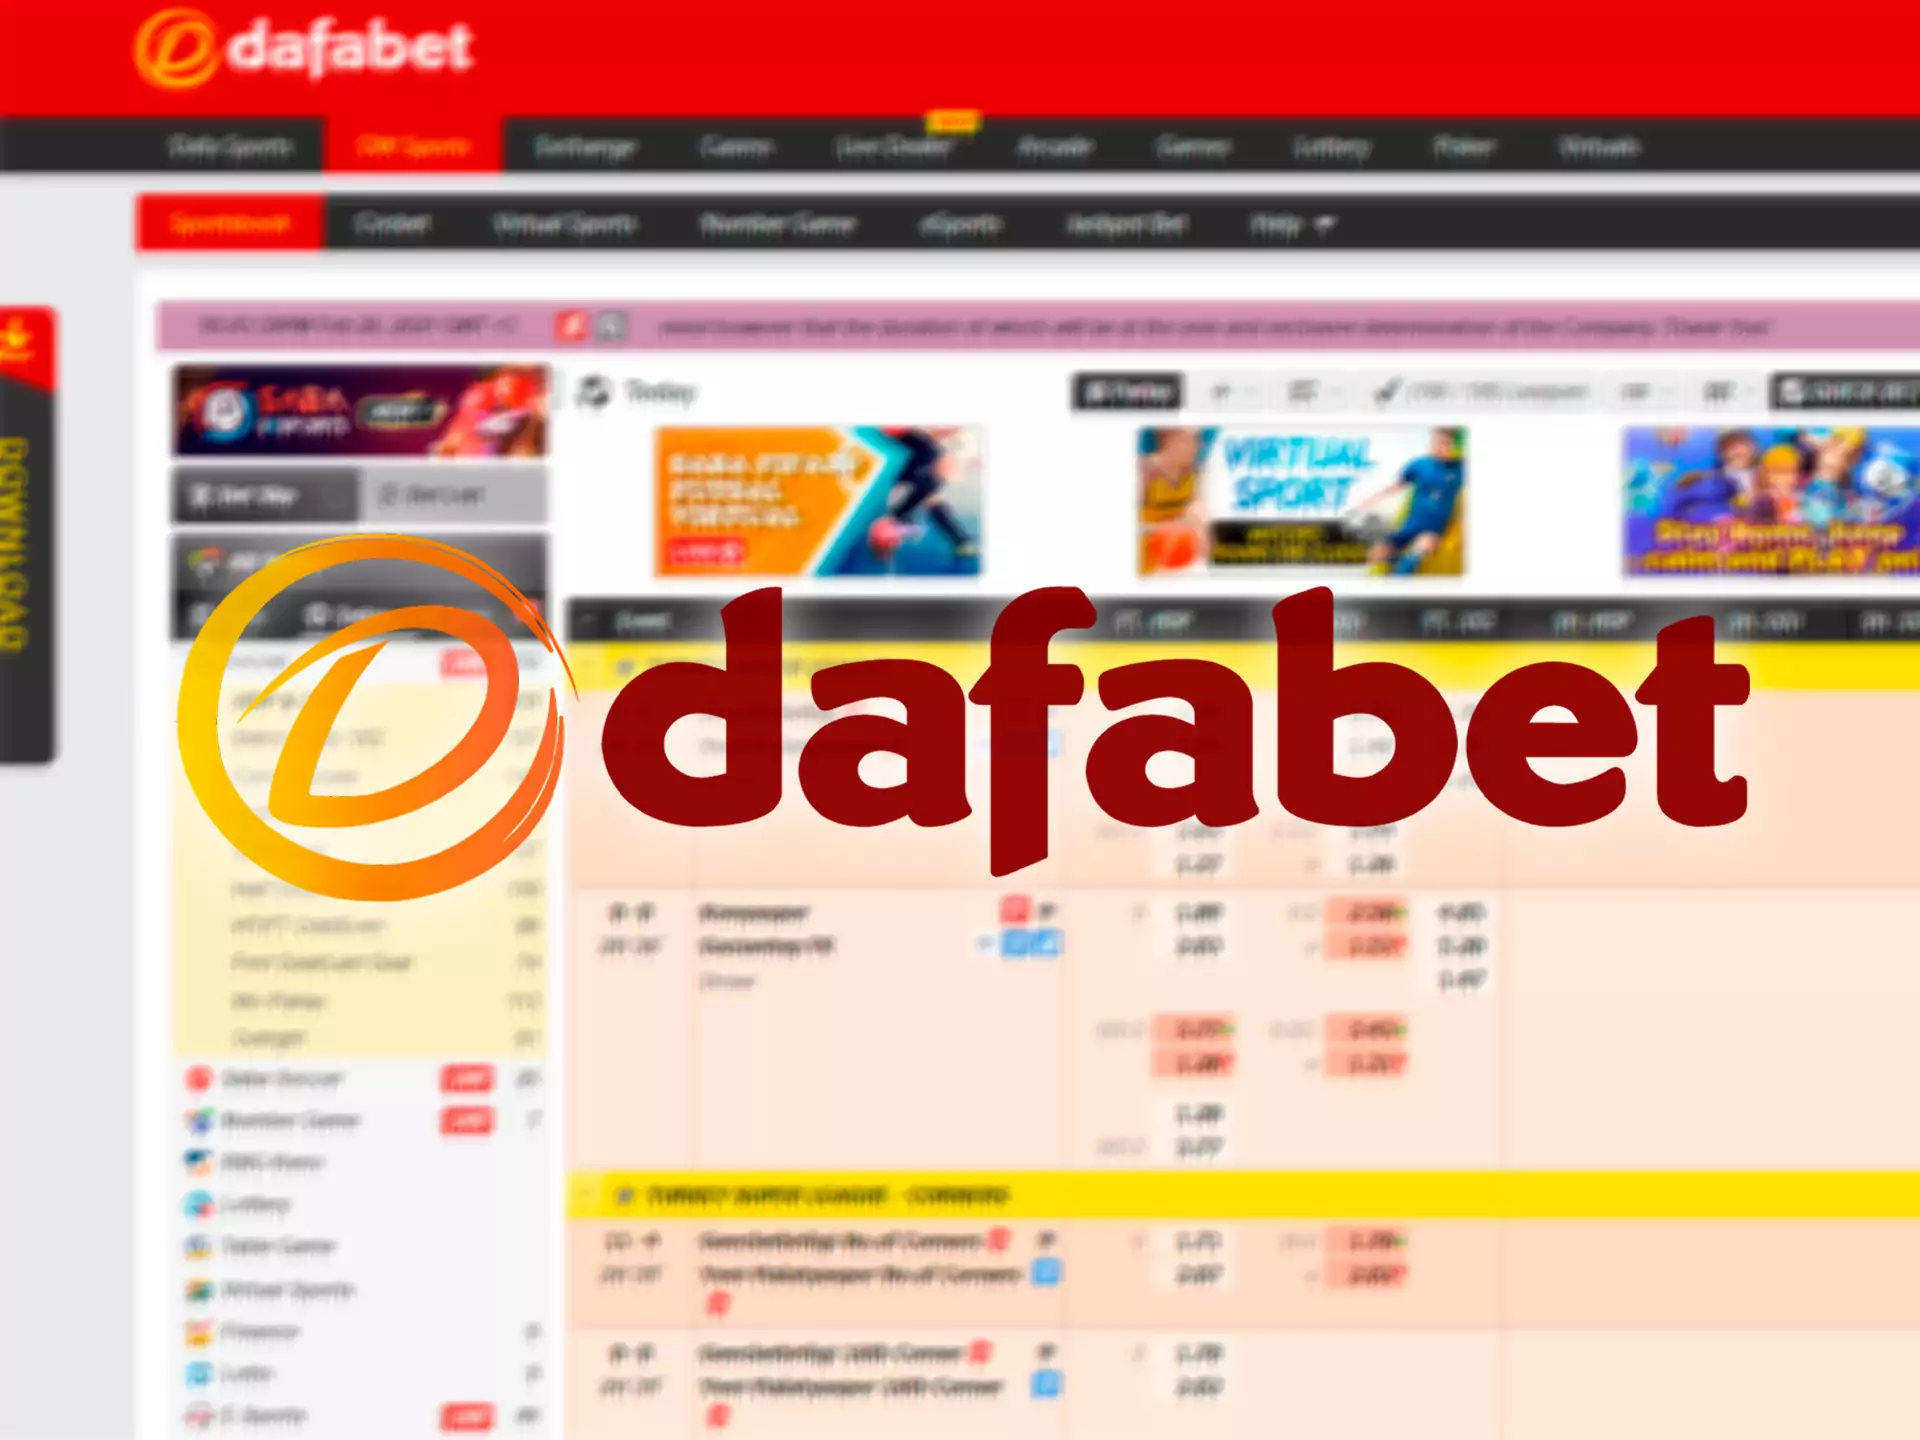 You can bet safely at Dafabet as it's a trustworthy IPL bookmaker.